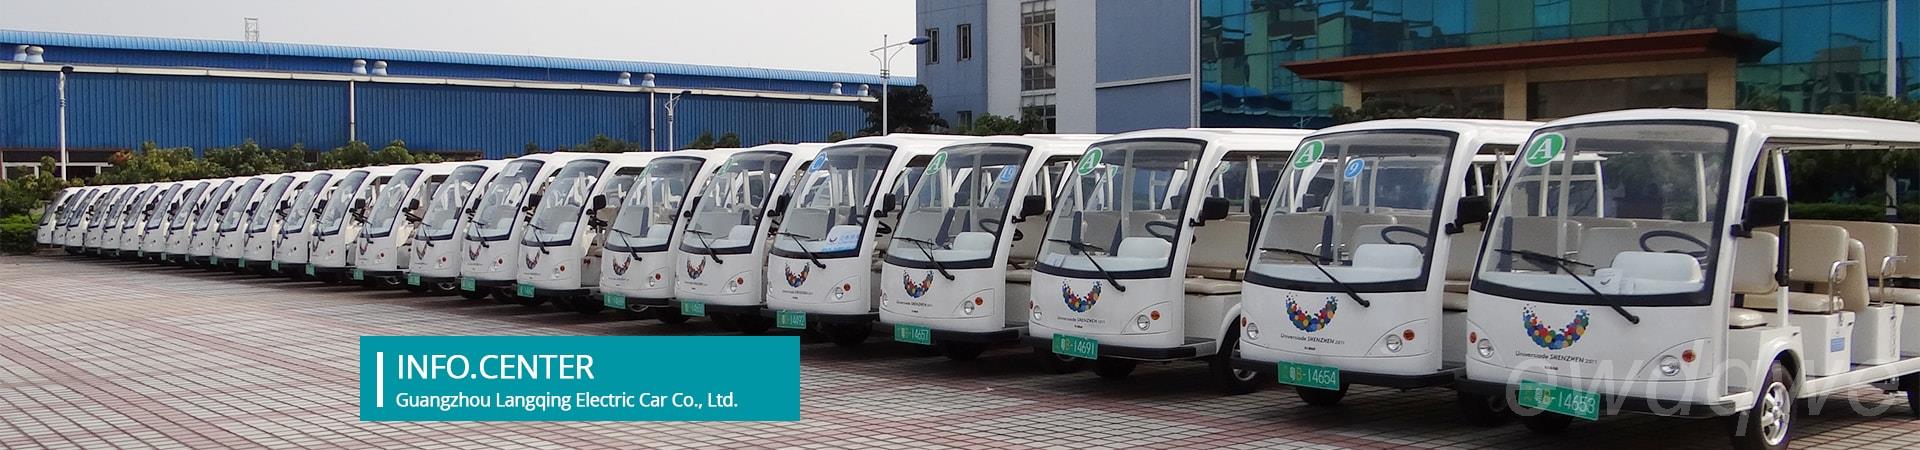 electric shuttle vehicles news